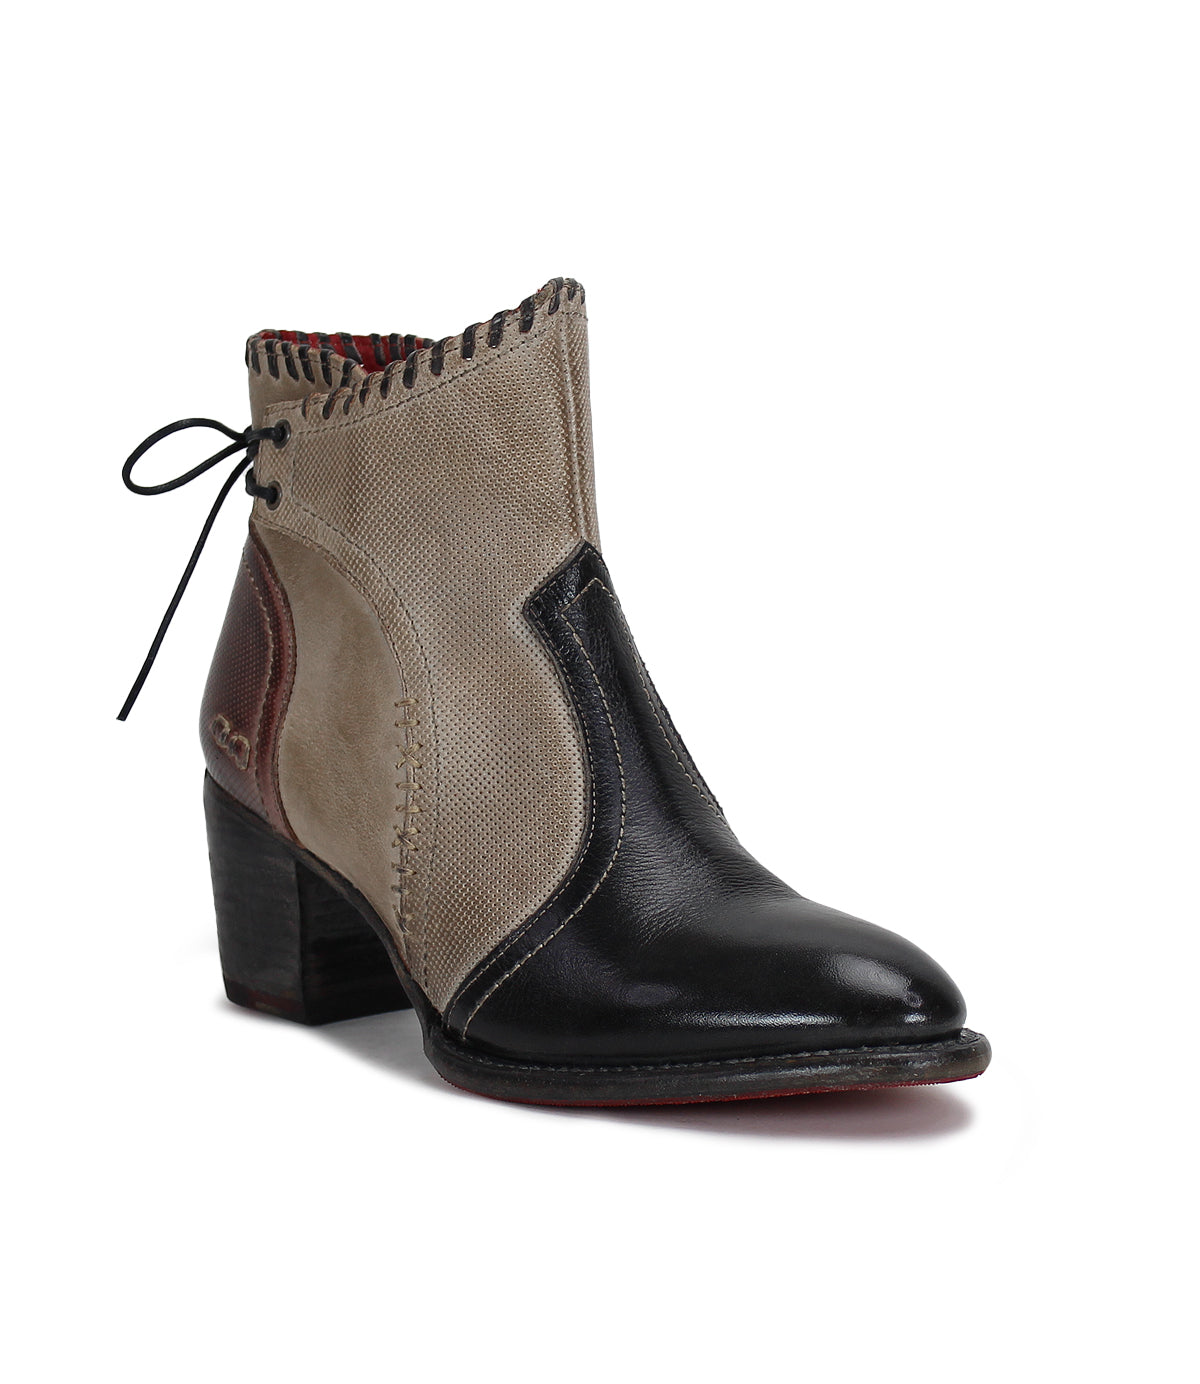 A women's ankle boot with a black, brown and beige color named Bia by Bed Stu.